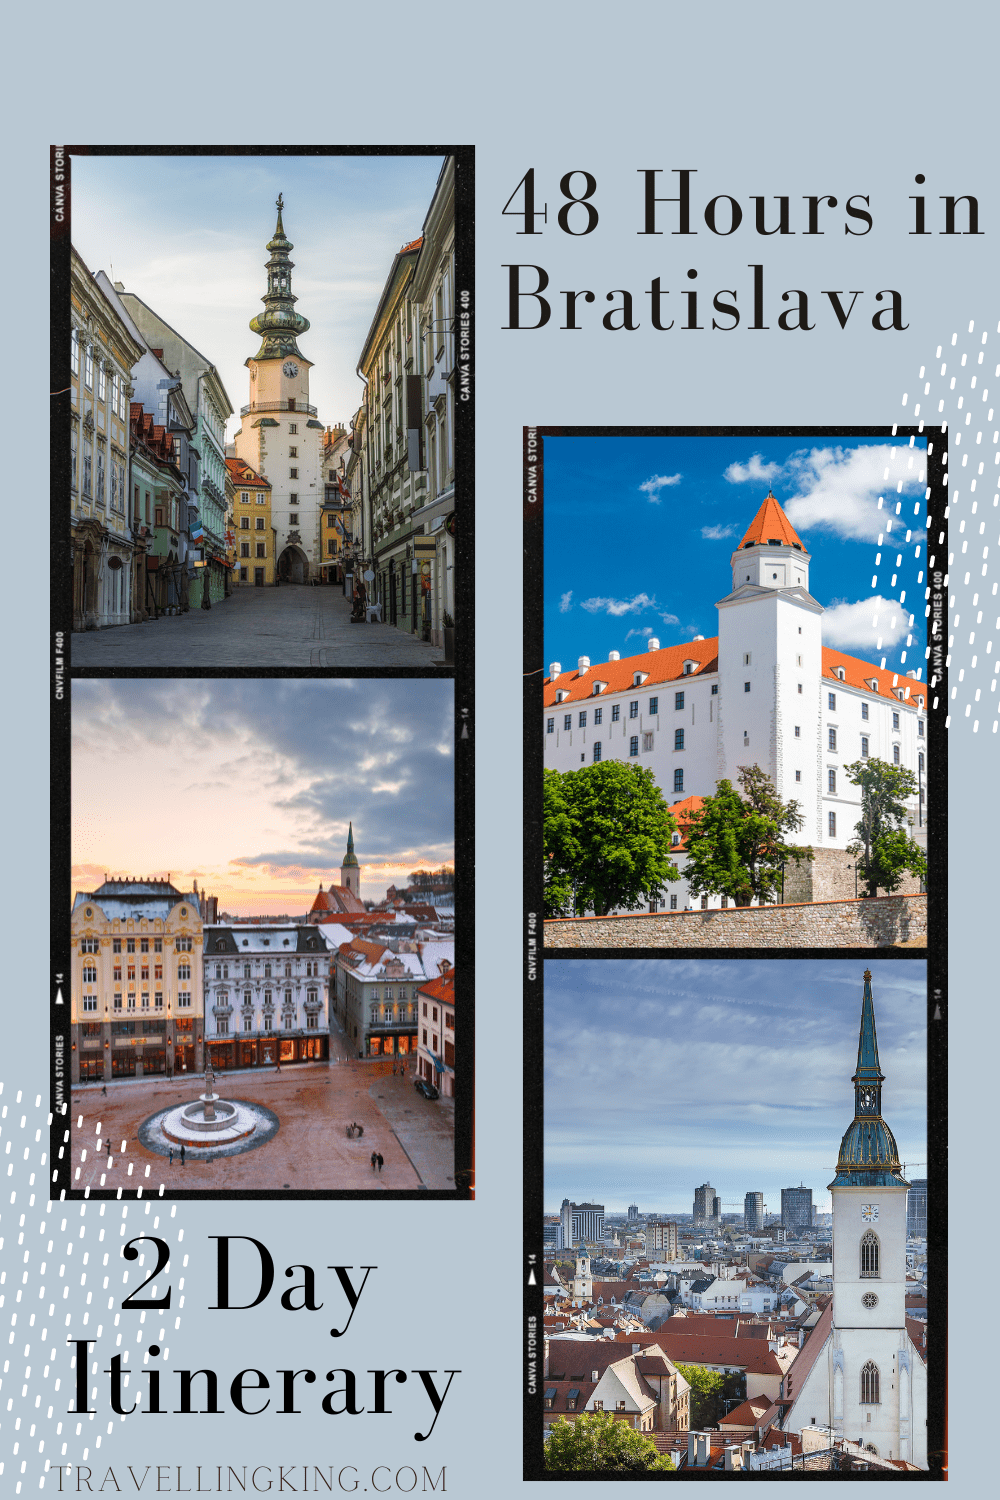 48 Hours in Bratislava - 2 Day Itinerary